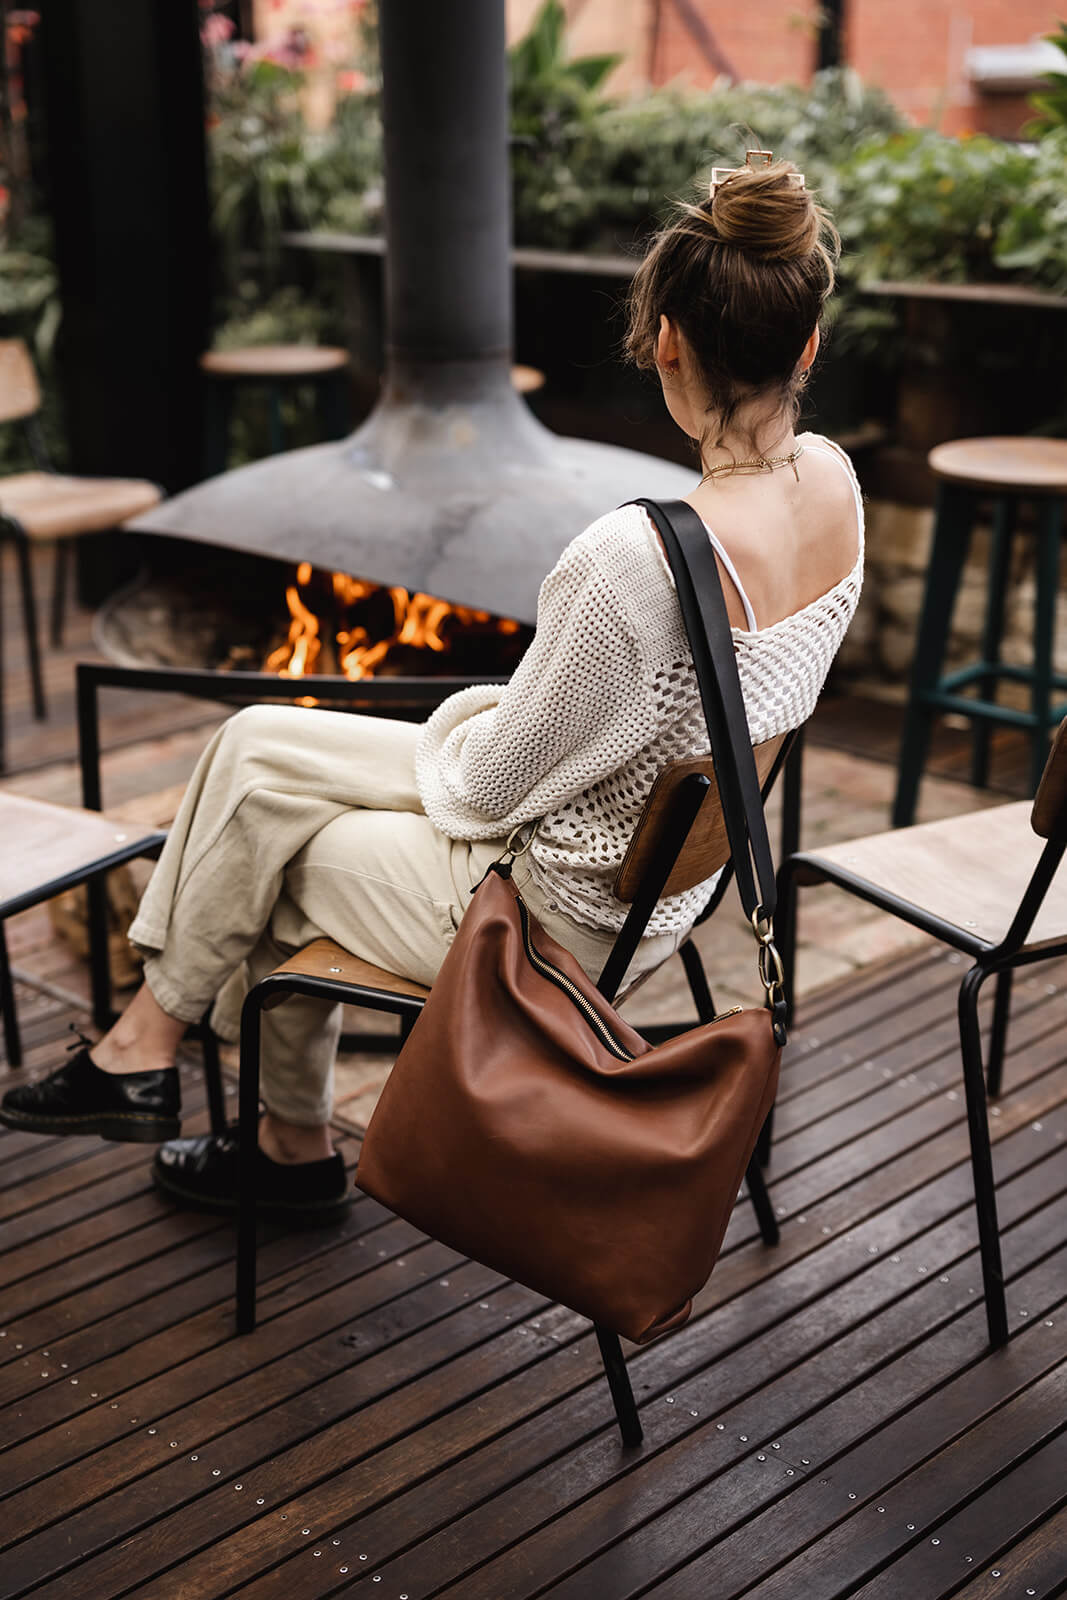 woman sitting on chair and facing open fire. Tan leather bag with black strap hanging on back of chair. The bag is the Ella Jackson Tan Leather Carryall